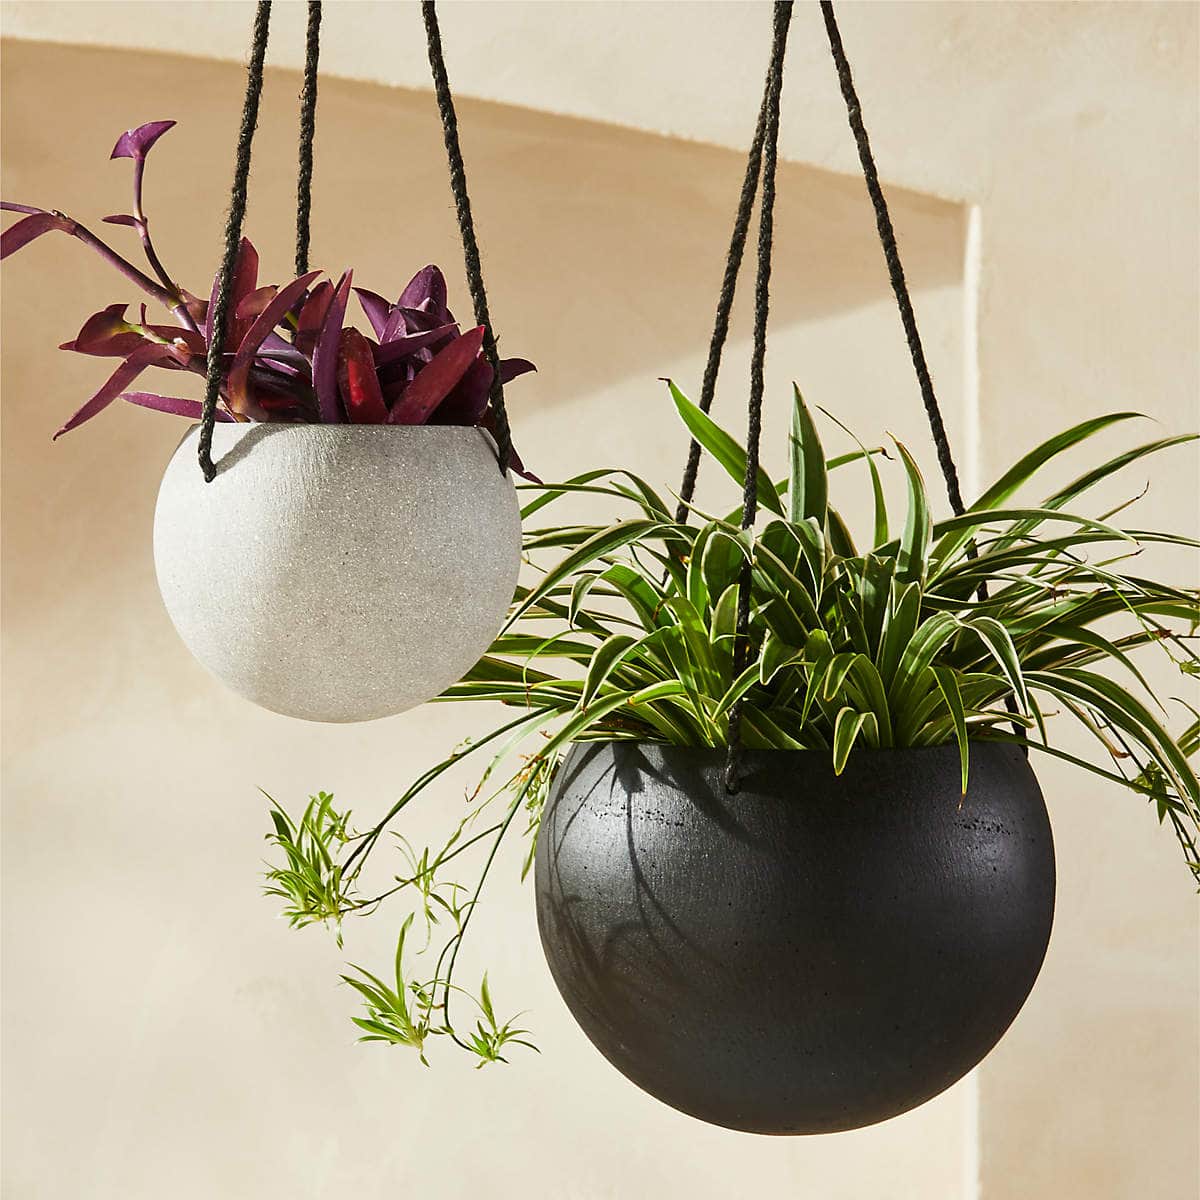 Try Orb Hanging Planters for a Modern Look